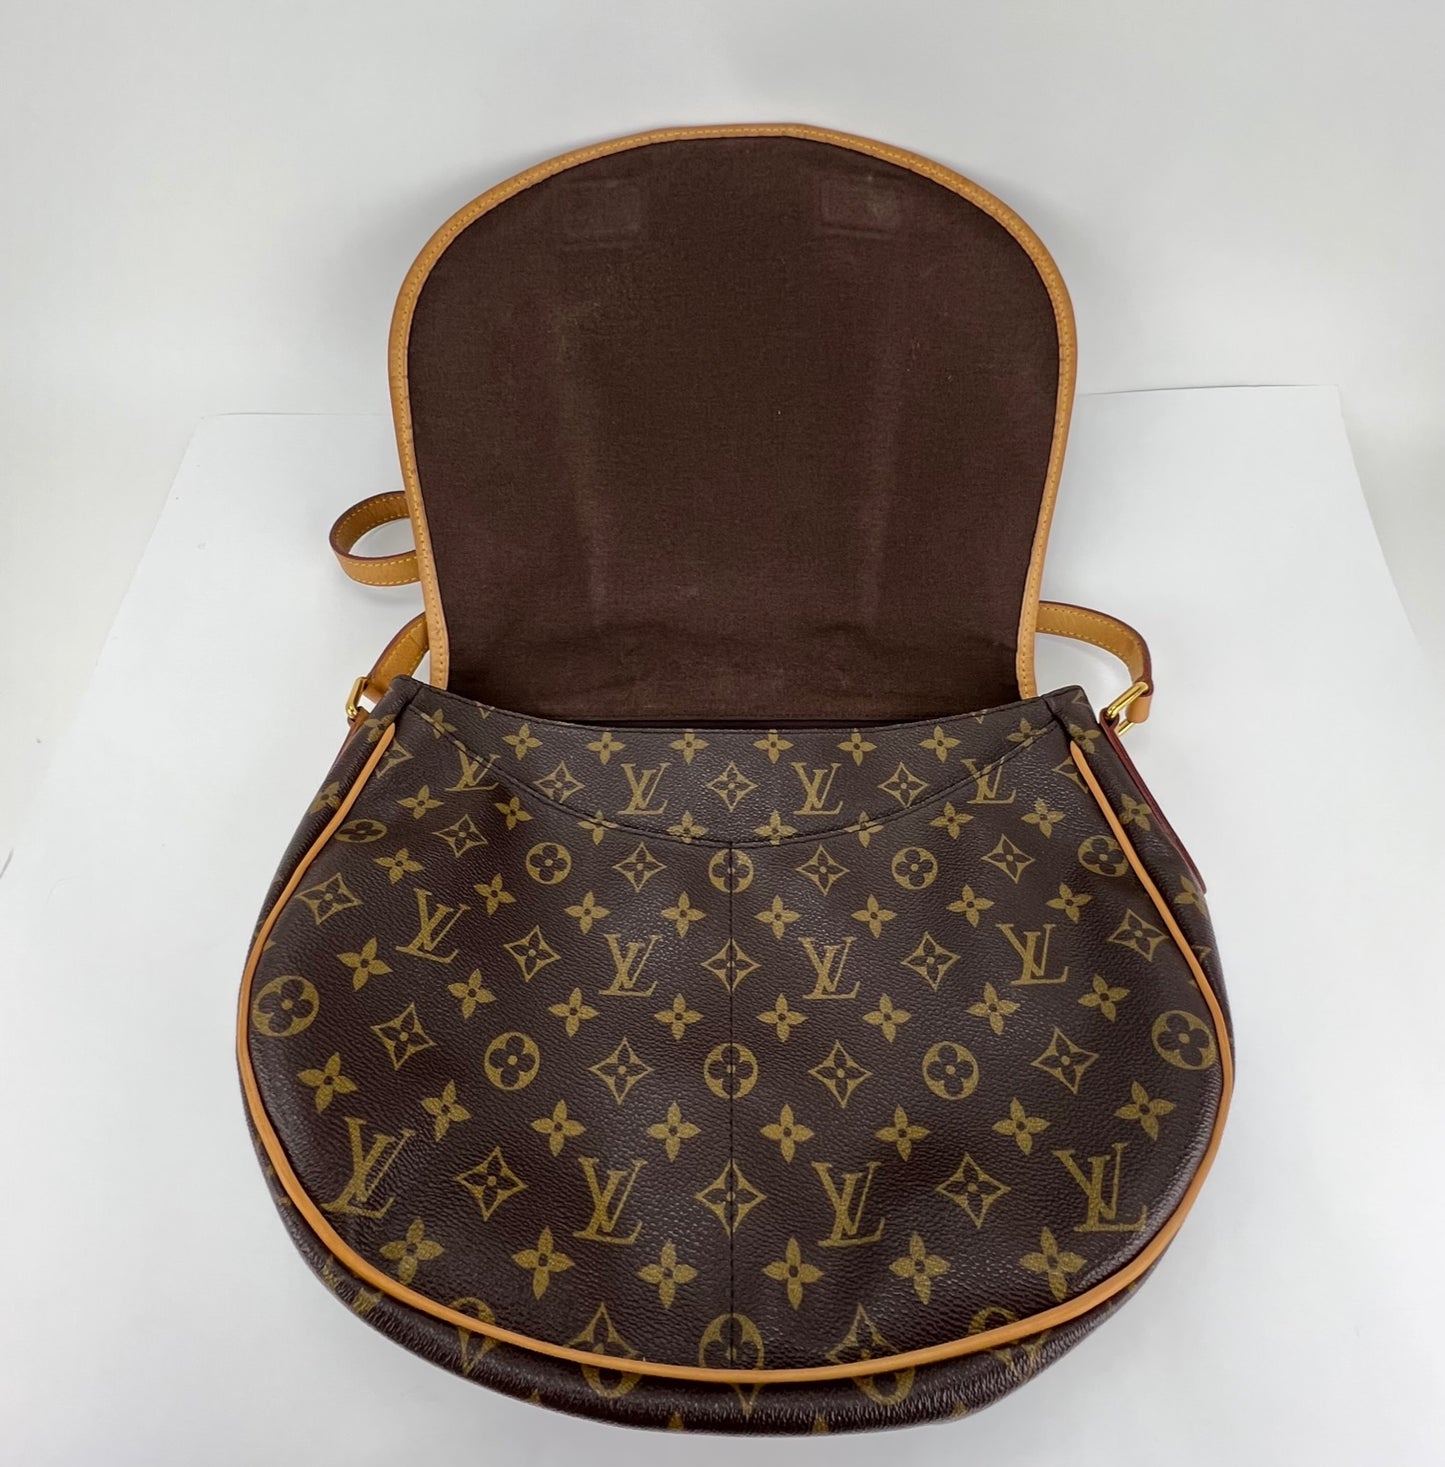 Louis Vuitton Tambourin-bag second hand prices